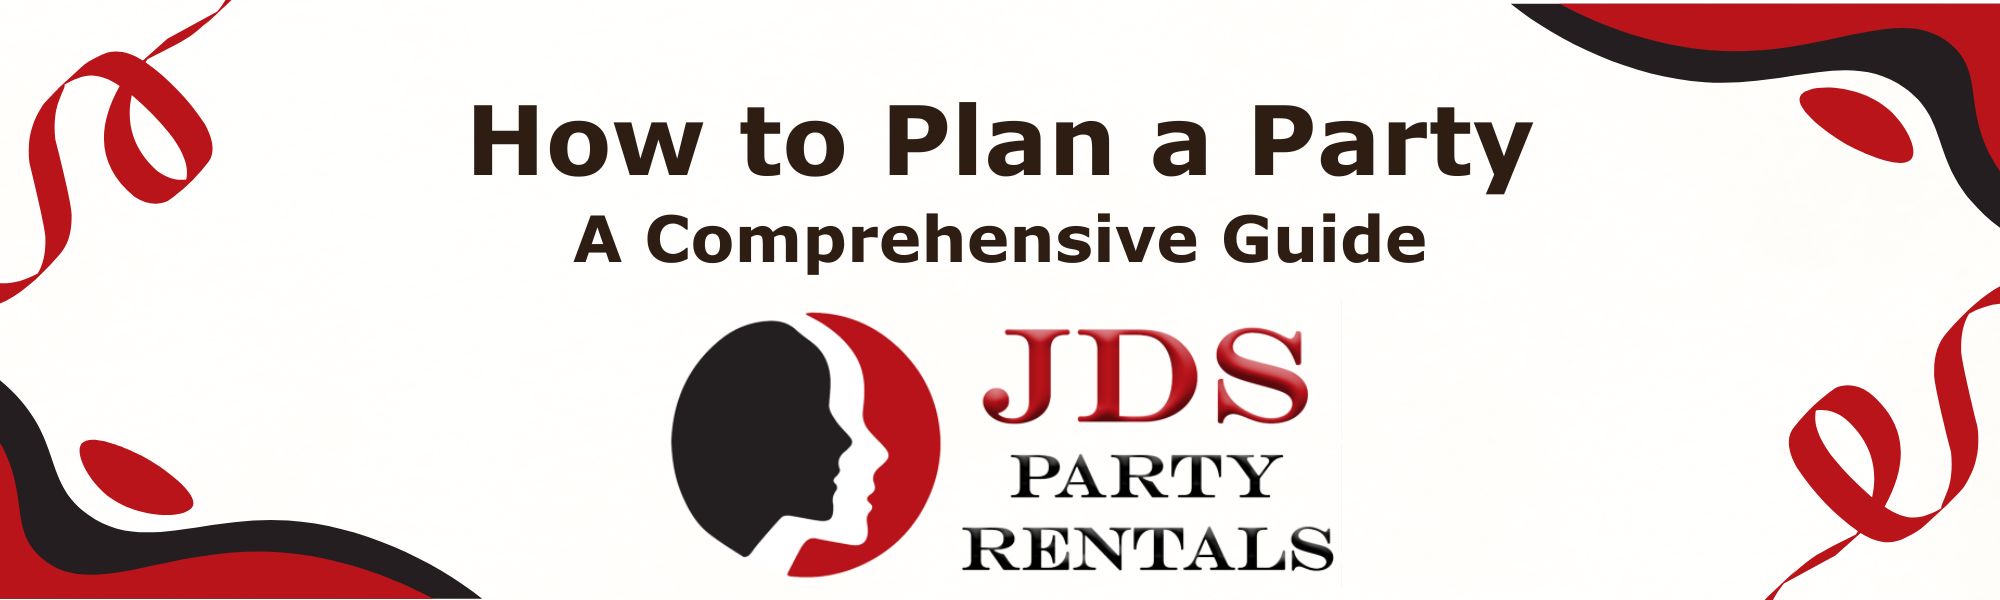 Blog - How to Plan A Party with JDS